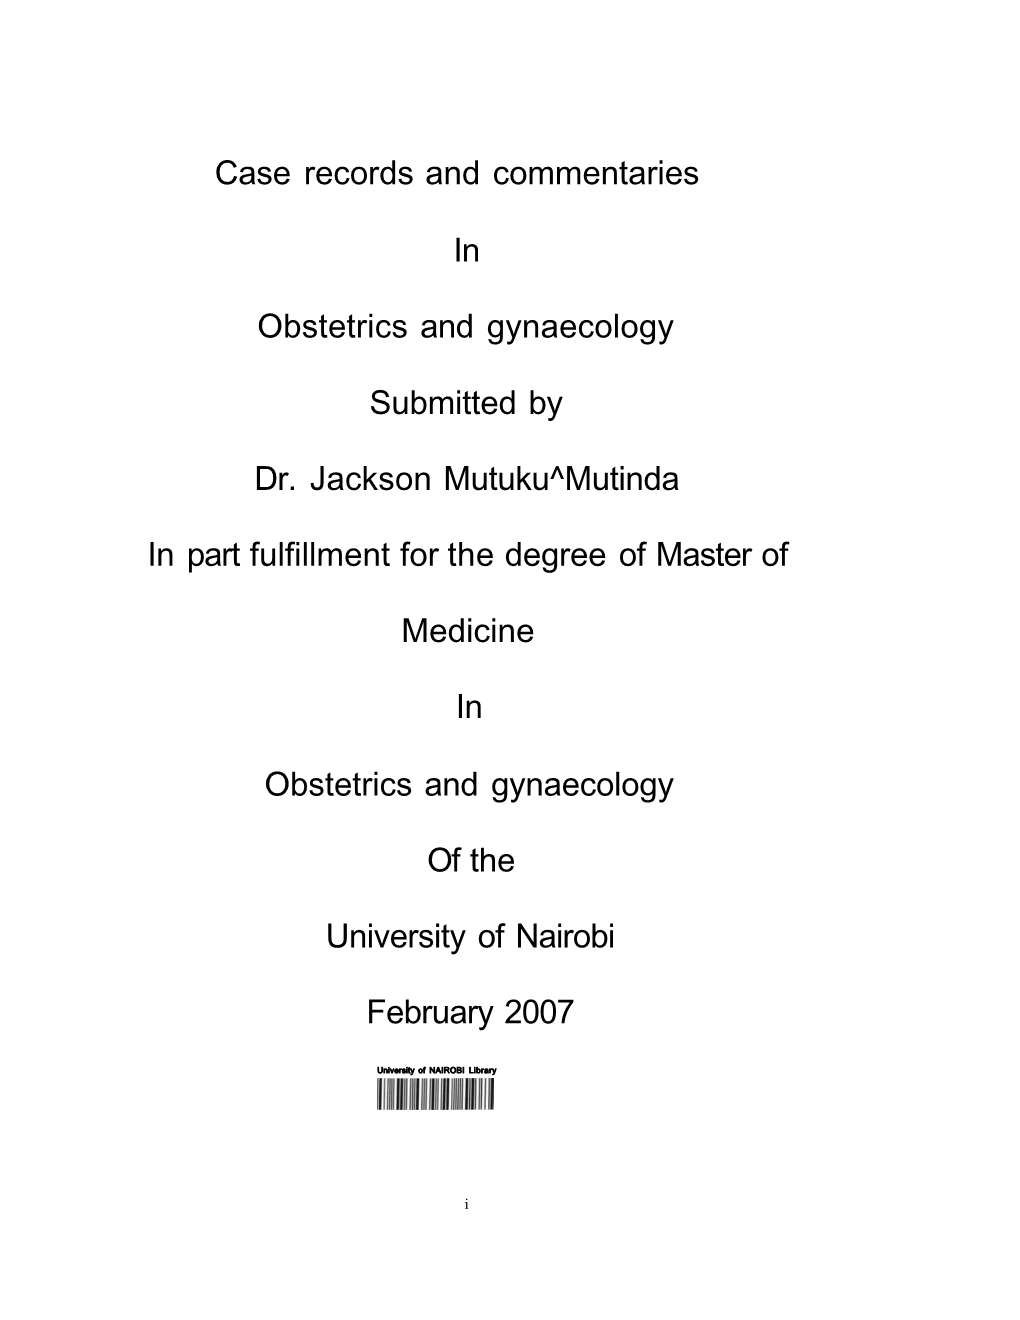 Case Reports and Commentaries in Obstetrics and Gynaecology